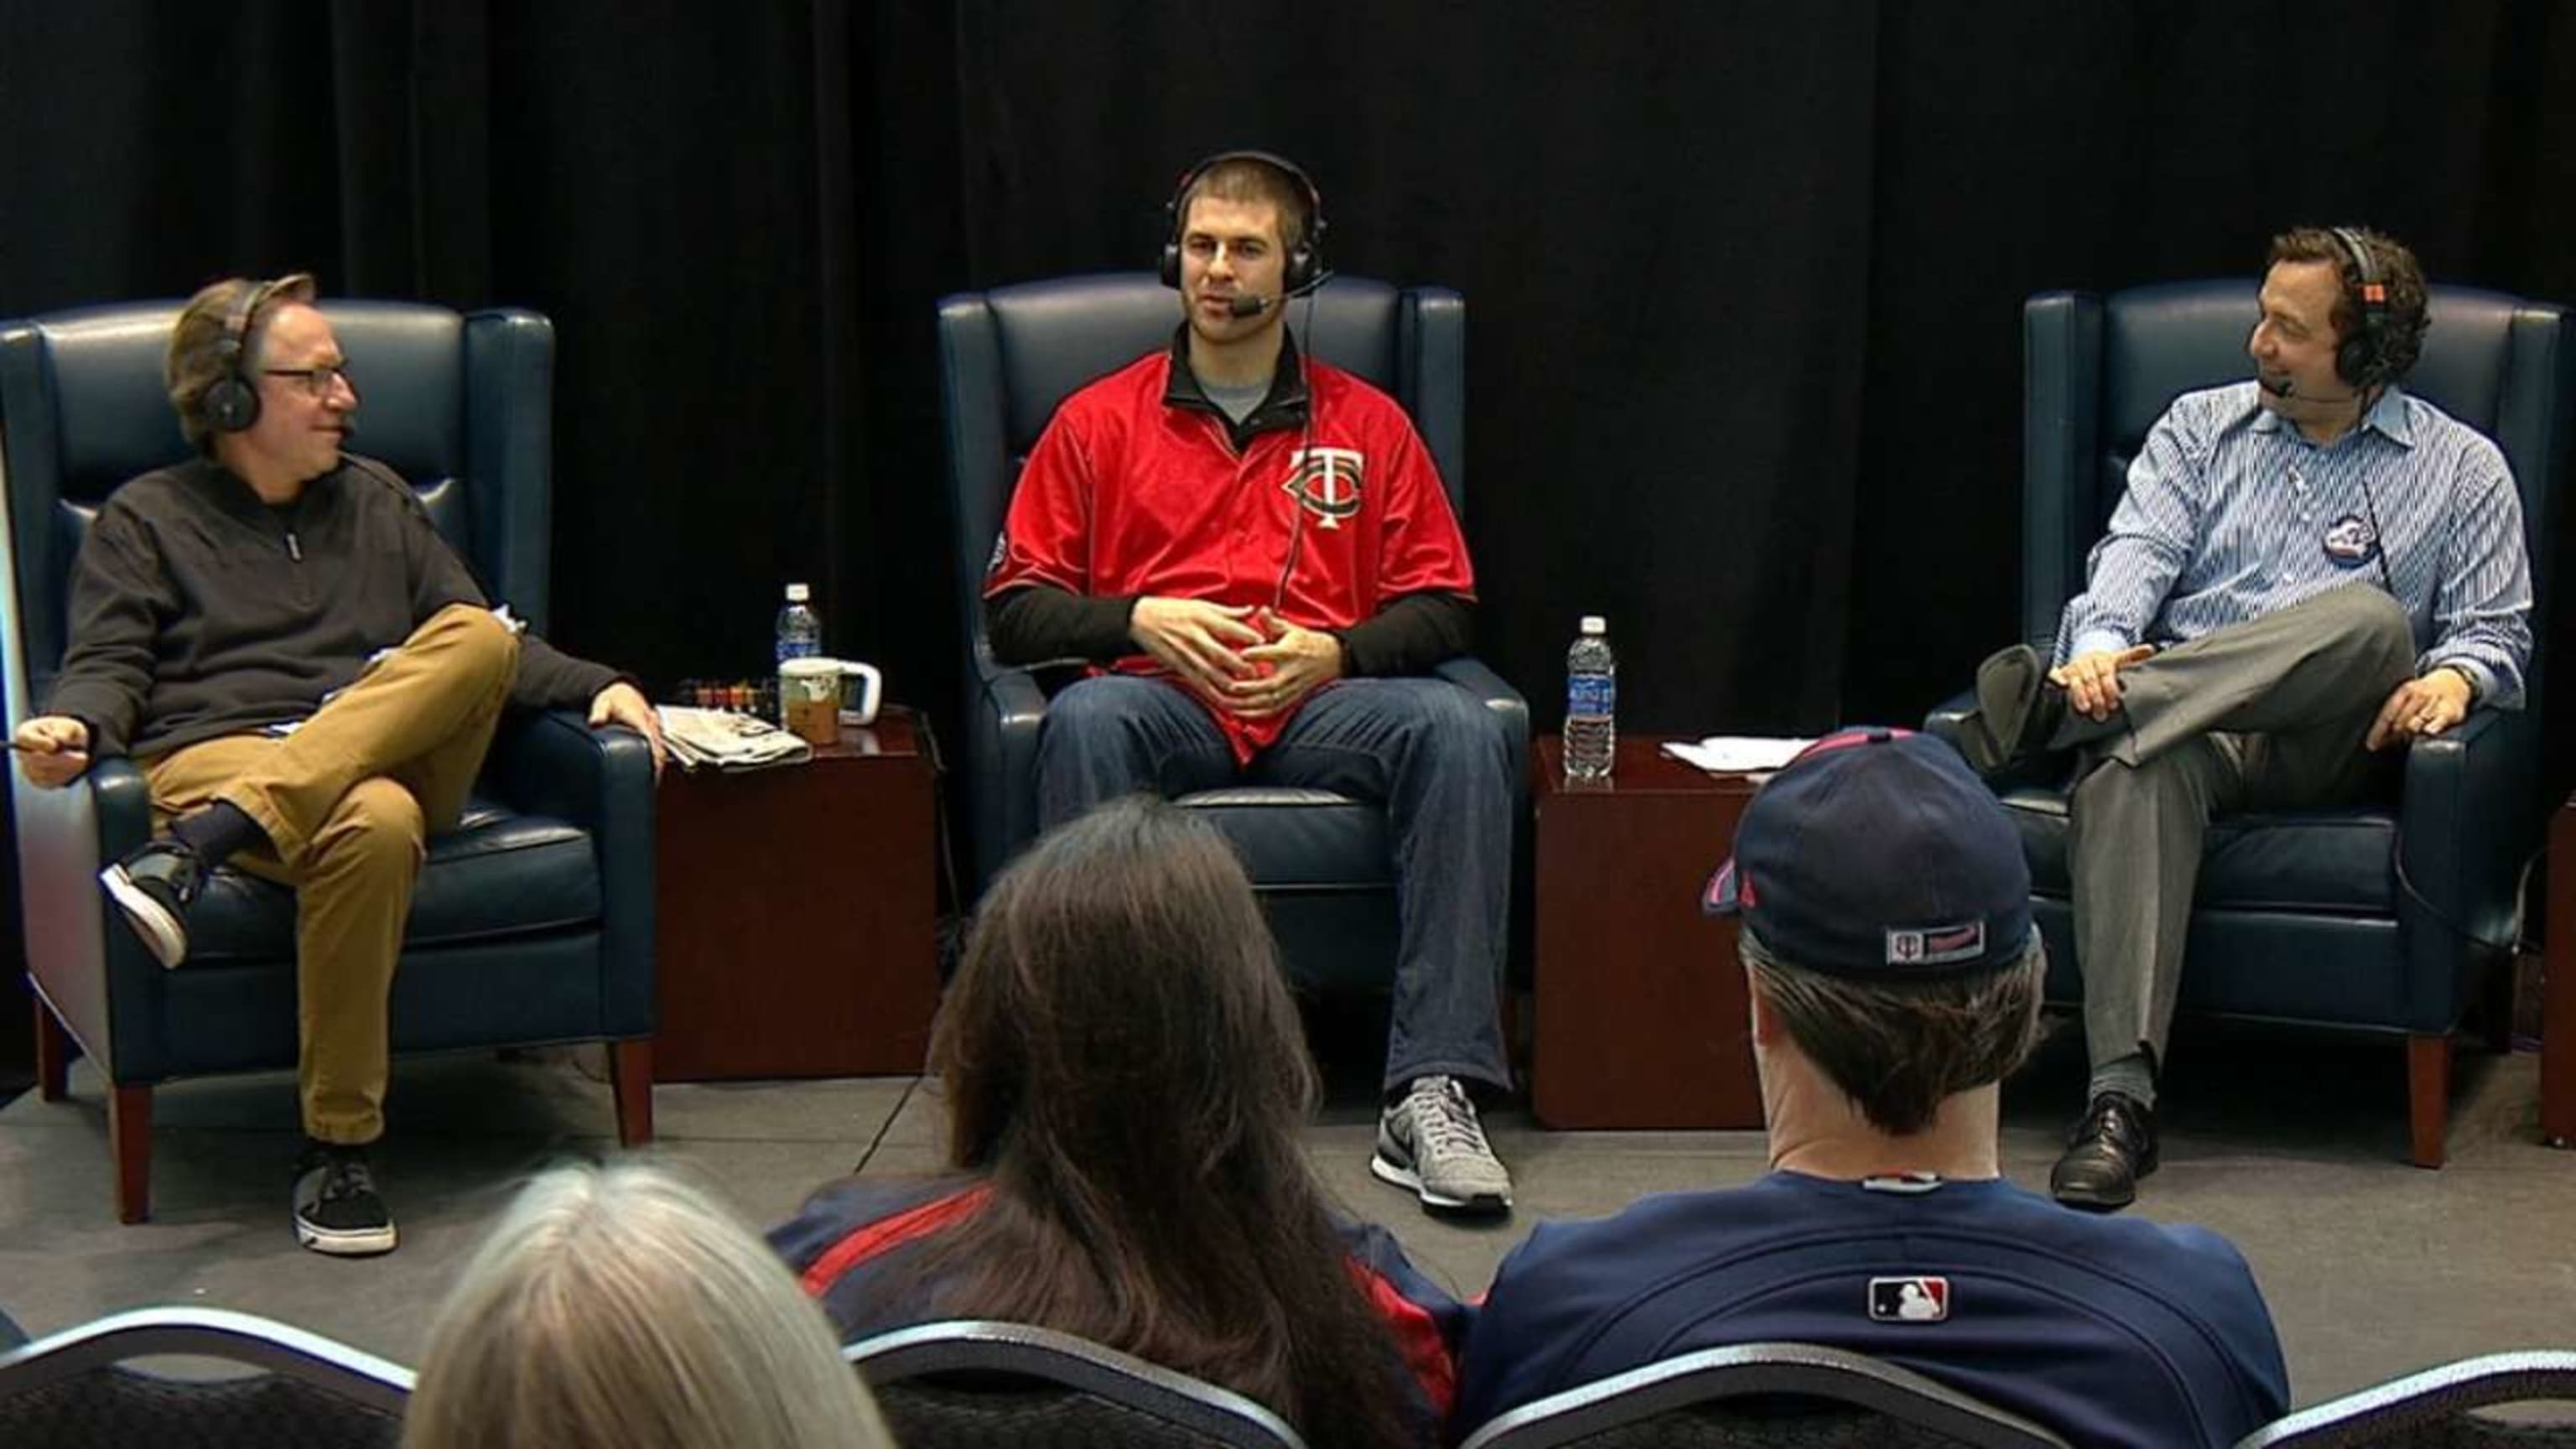 Joe Mauer says concussion has affected vision